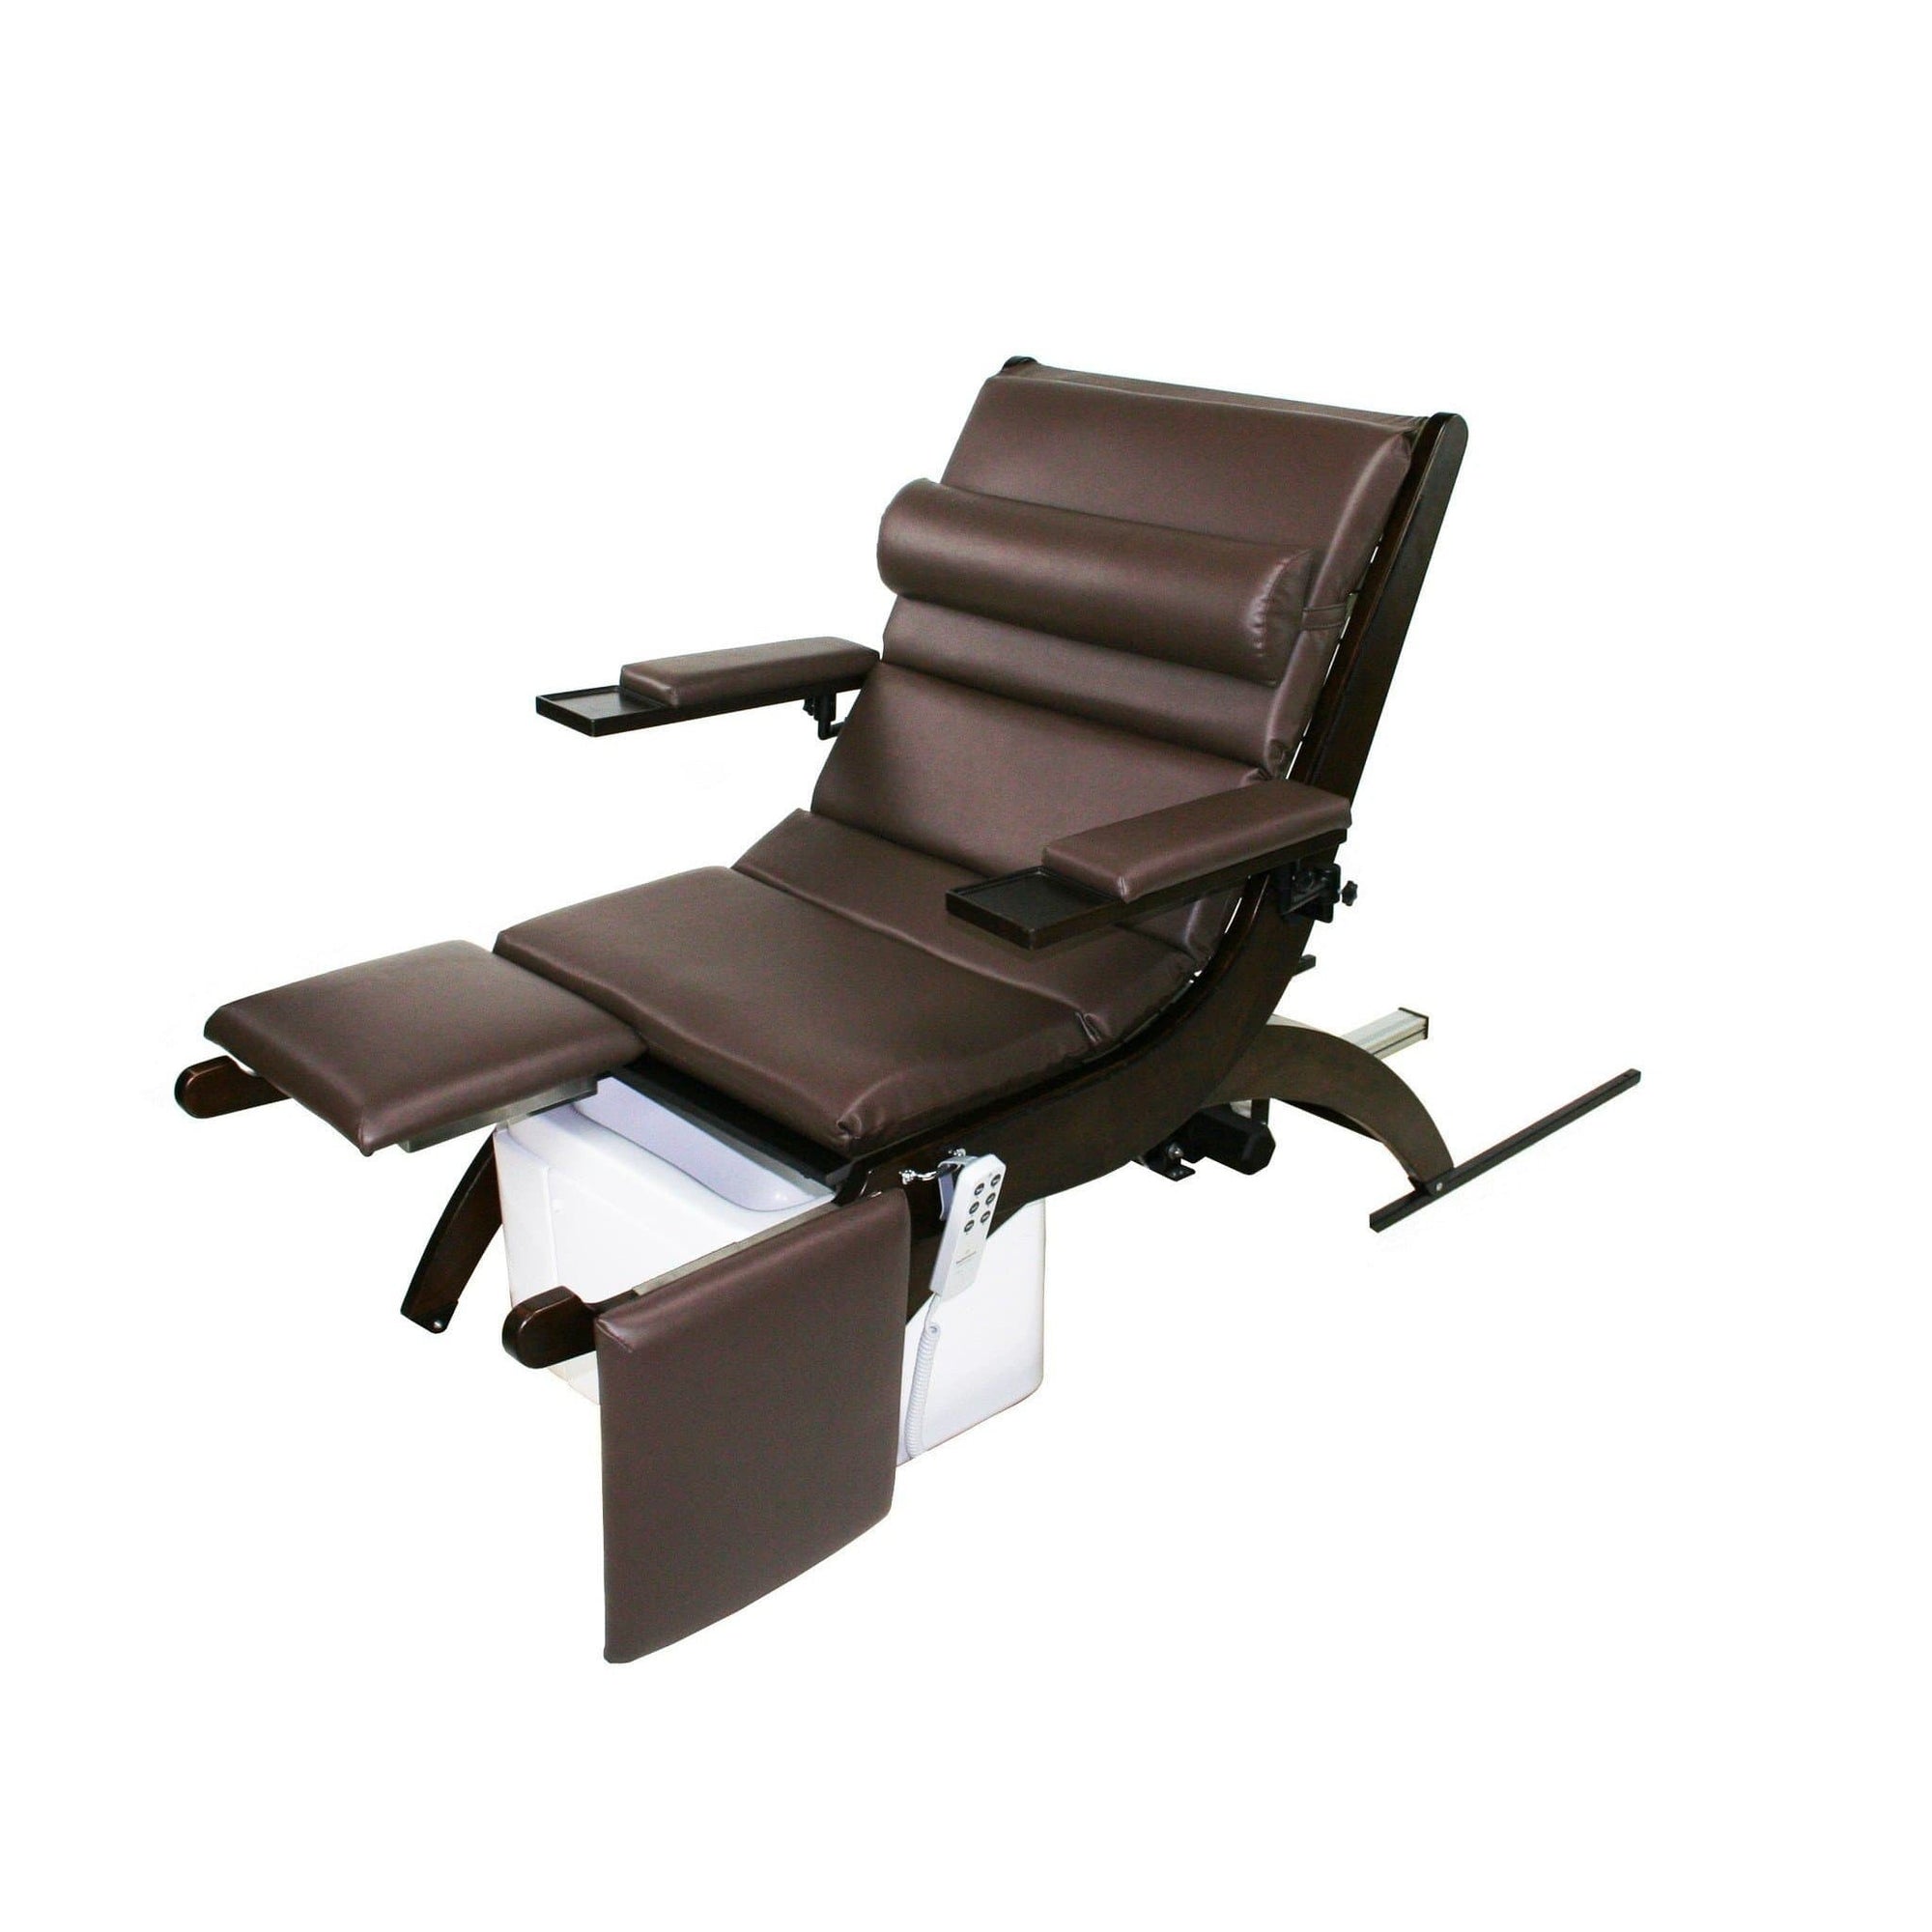 Touch America Touch America Motorized Breath Pedi-Lounge Pedi-Lounger - ChairsThatGive